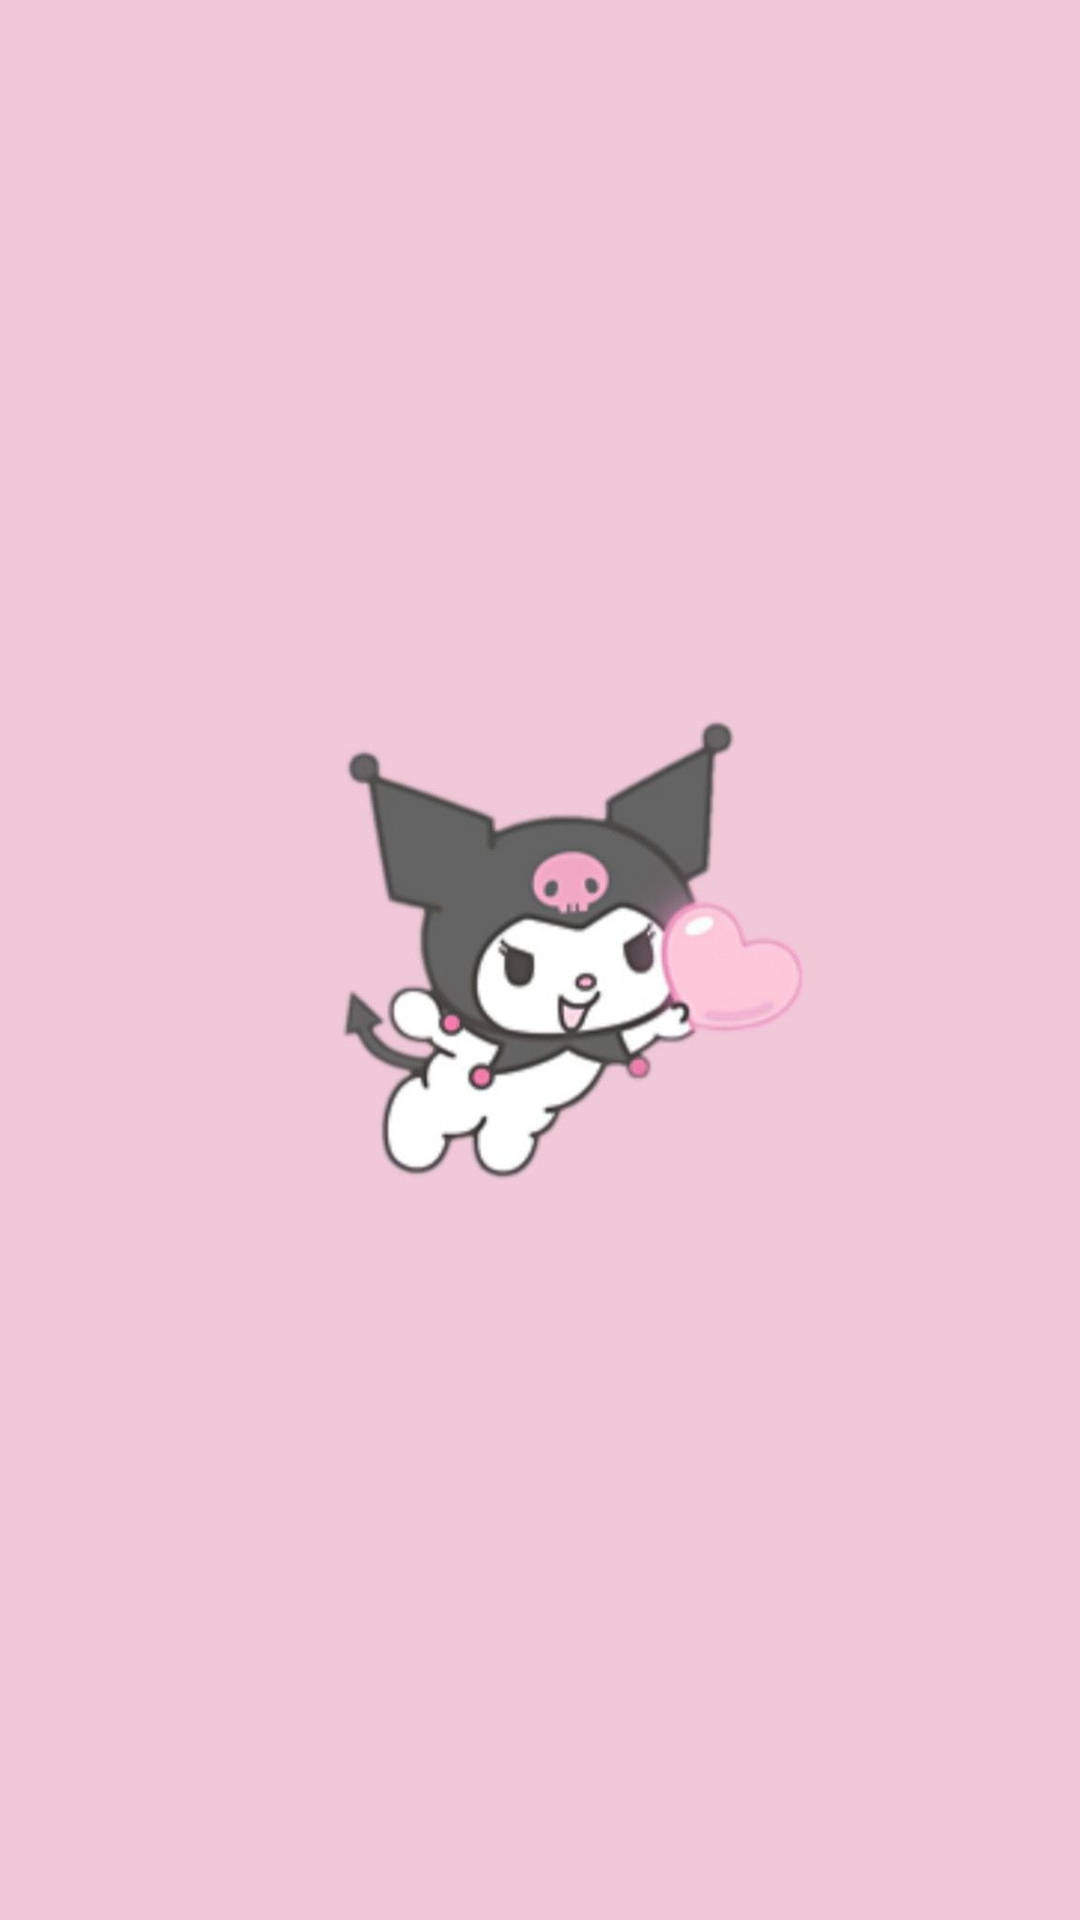 Rival Of My Melody Kuromi Holding Heart